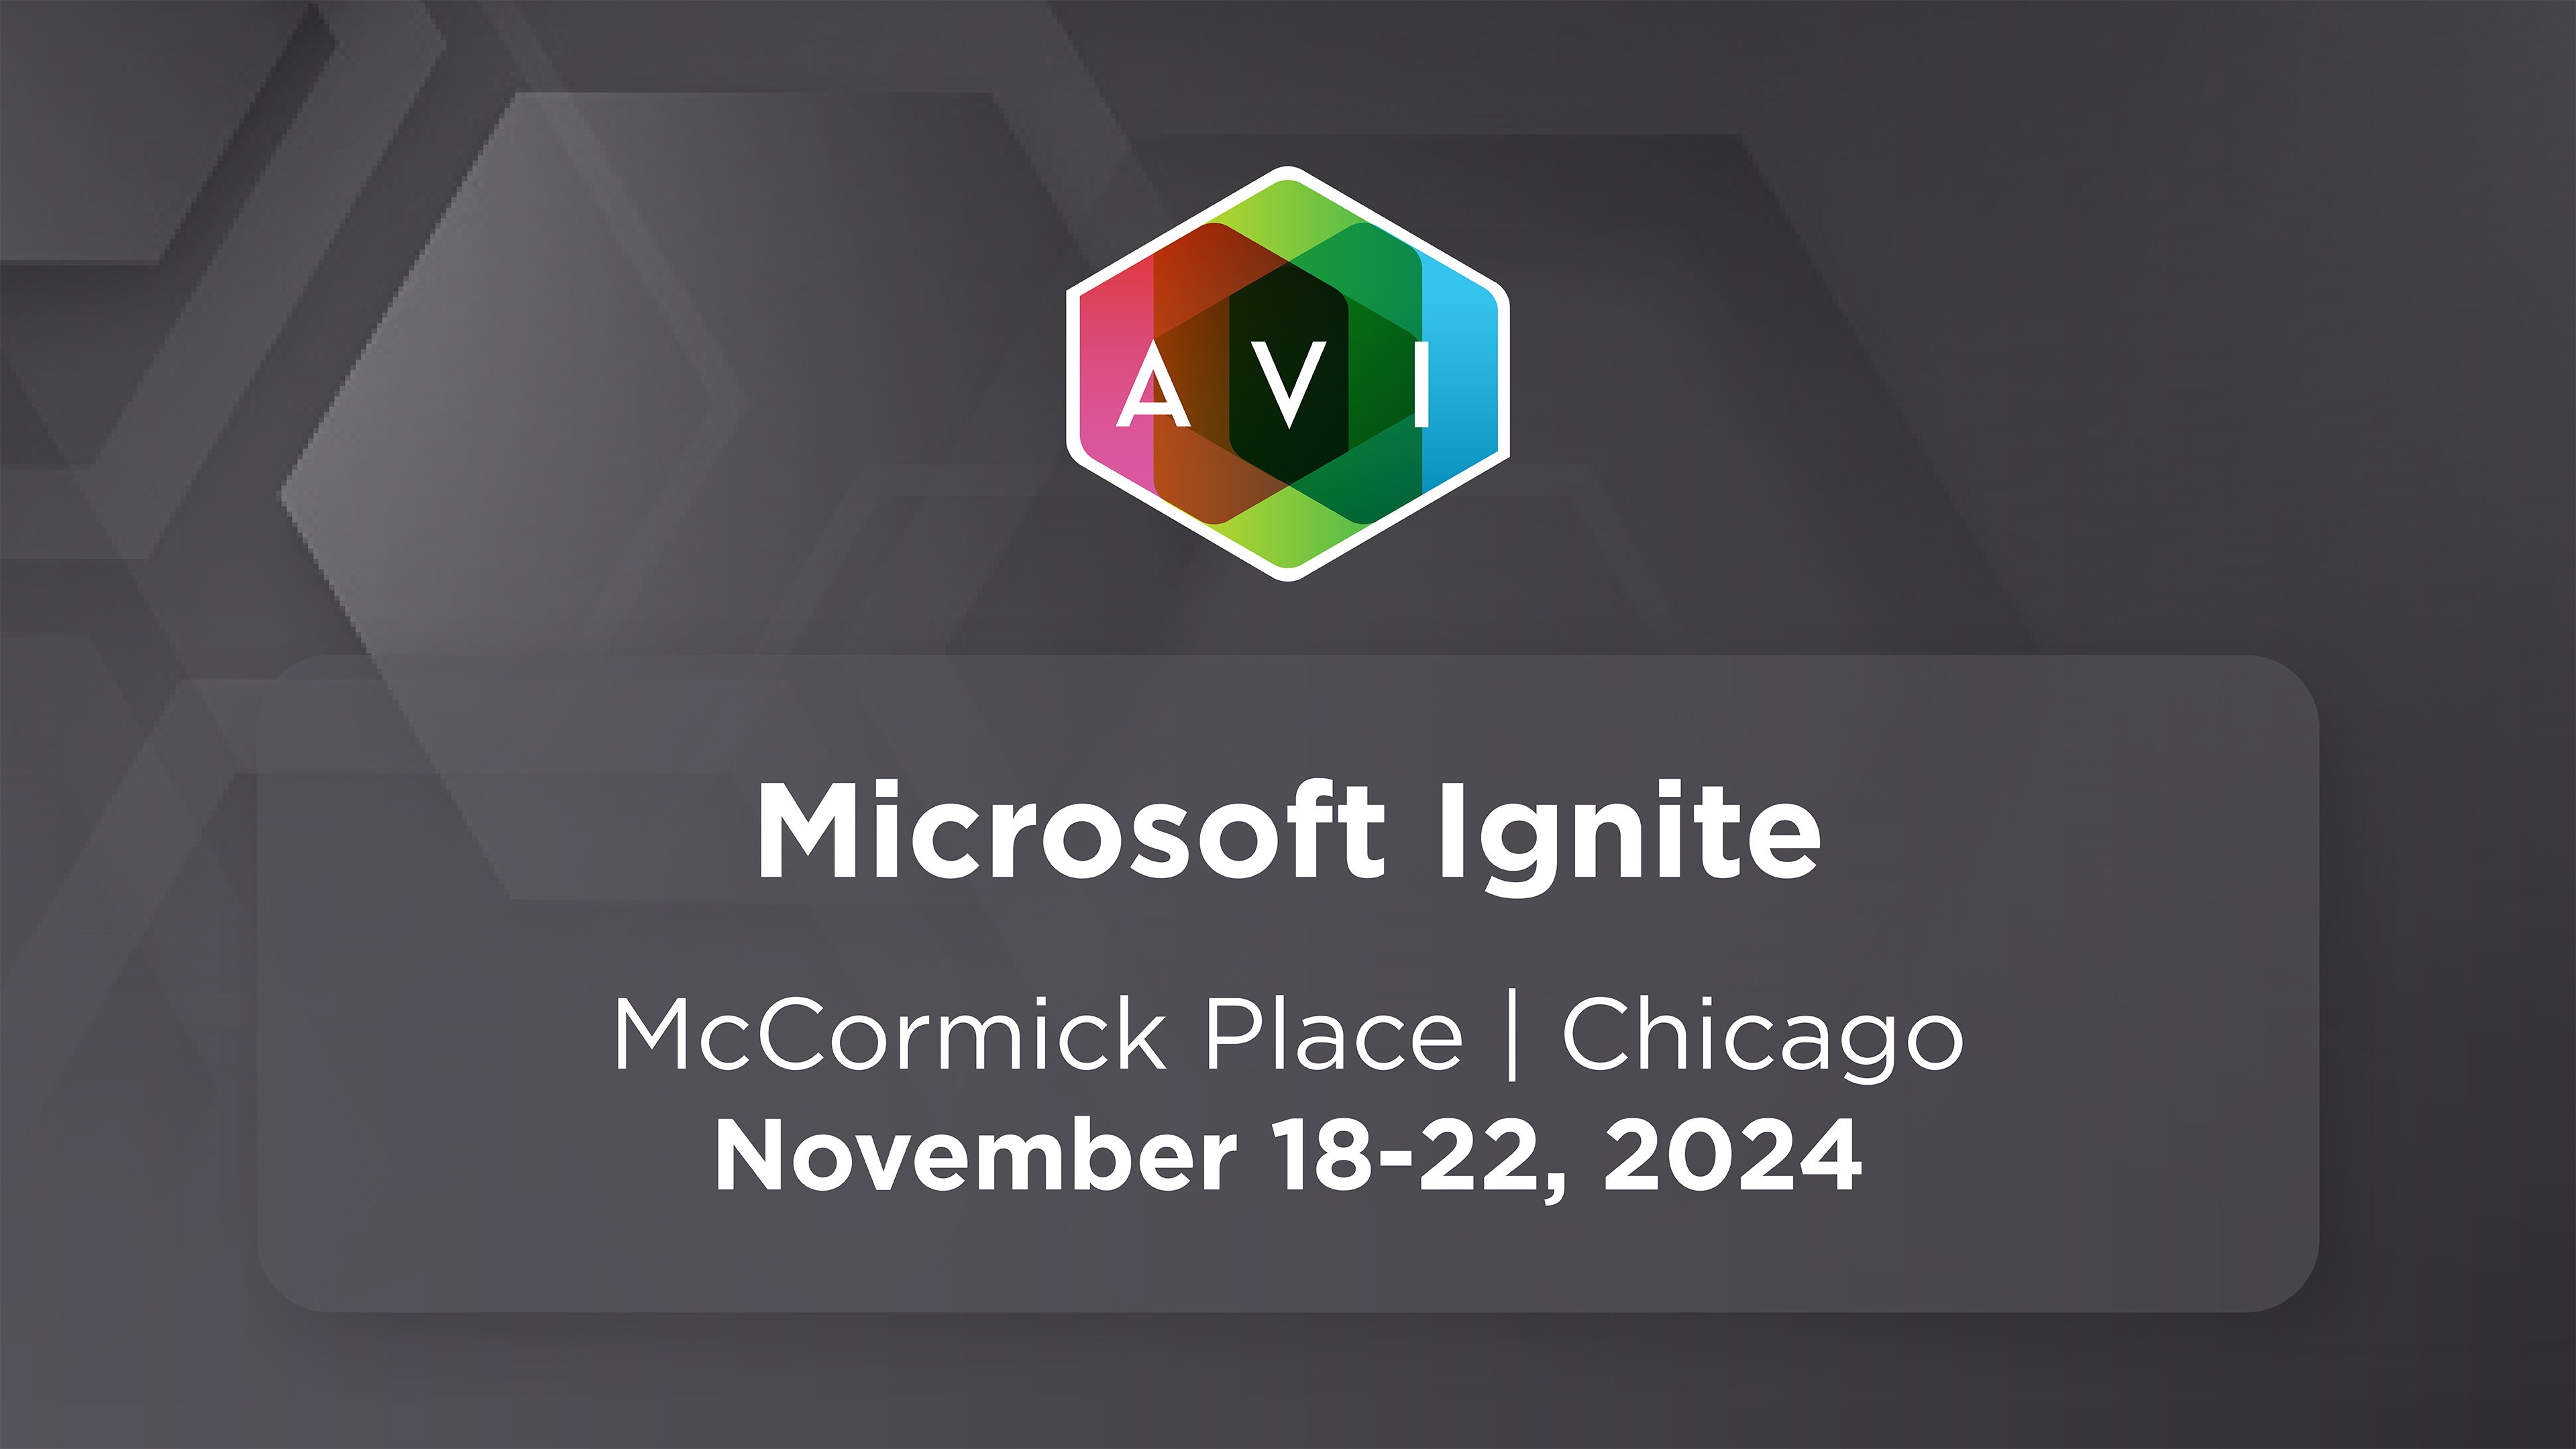 Image{width=3840,height=2160,url='https://www.avisystems.com/hubfs/events/additional-events/2024/microsoft-ignite-event-page-thumbnail.jpg',altText='microsoft-ignite-event-page-thumbnail',fileId=171808975444}